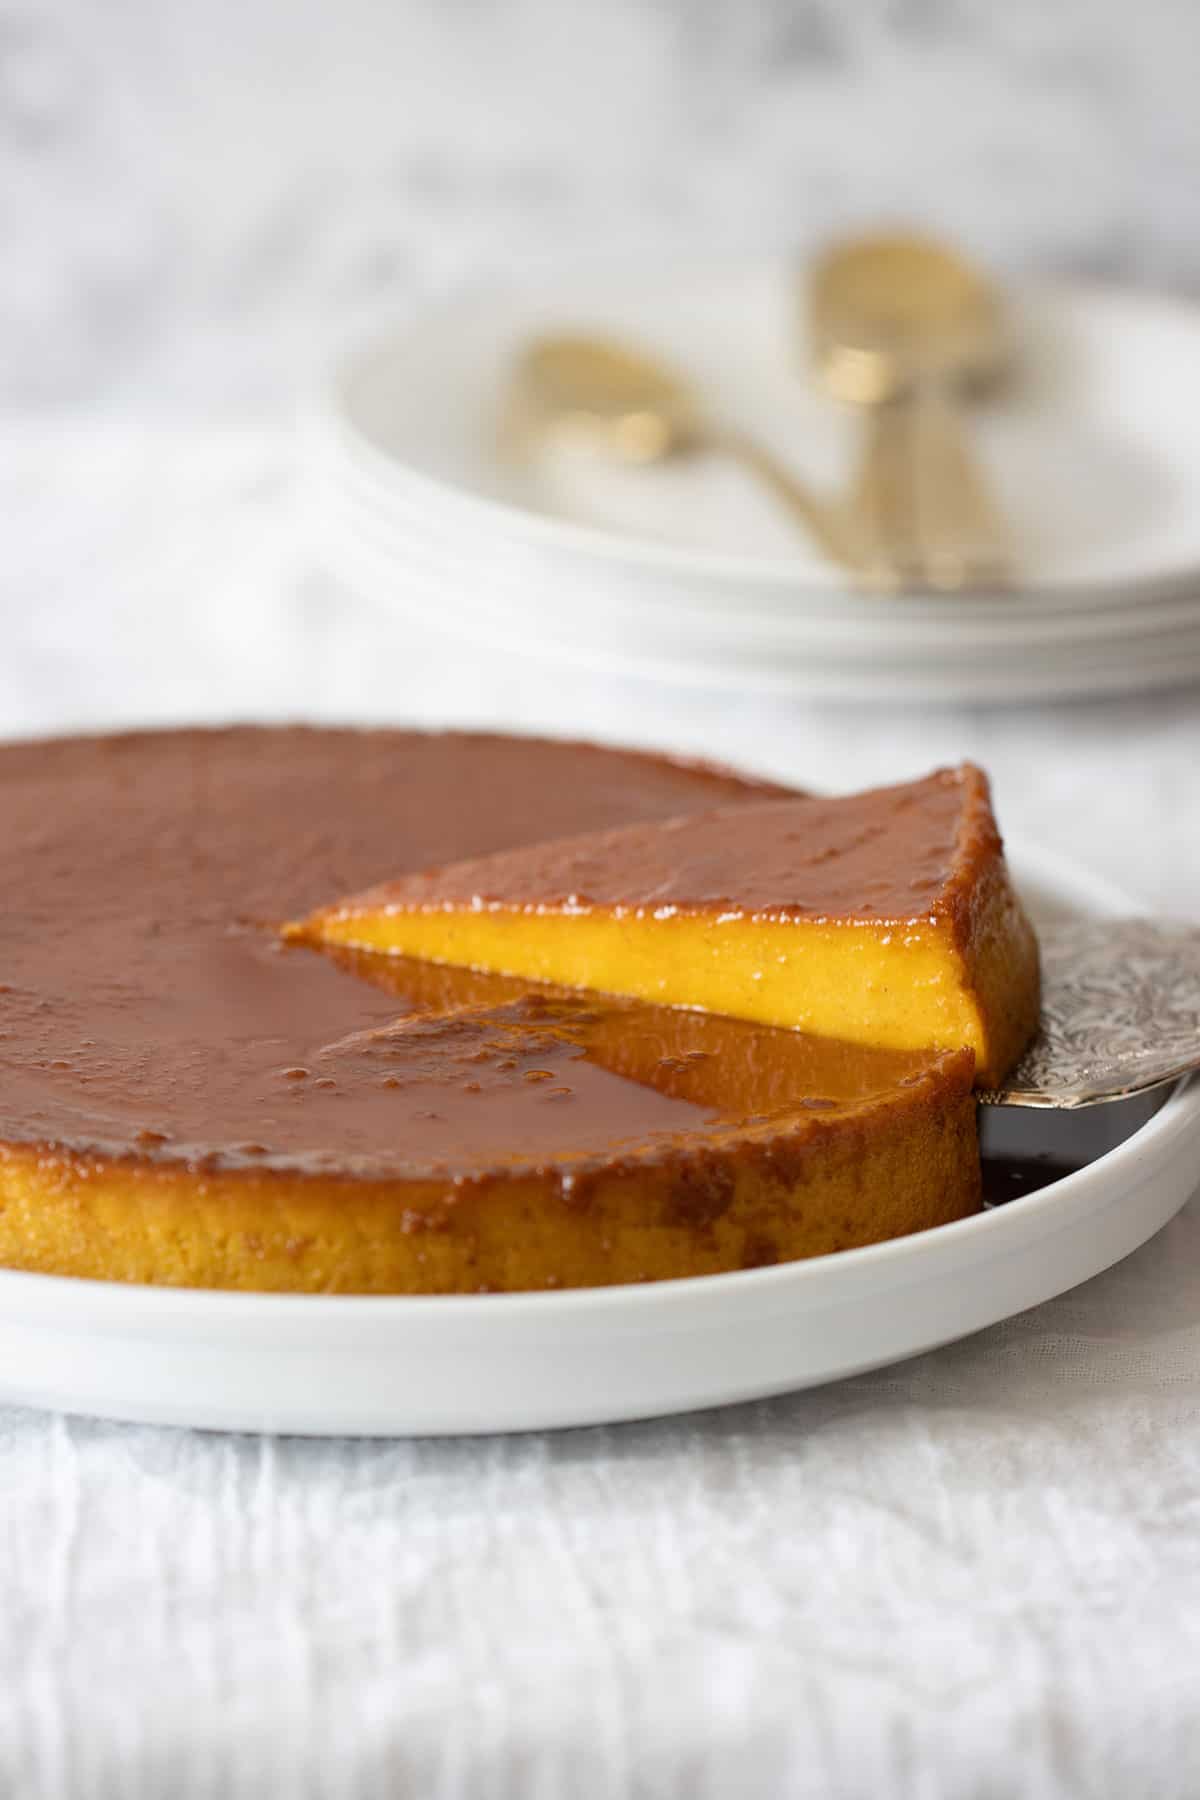 a piece of flan de calabaza-pumpkin flan being pick up with a cake server with plates and spoons in the background.